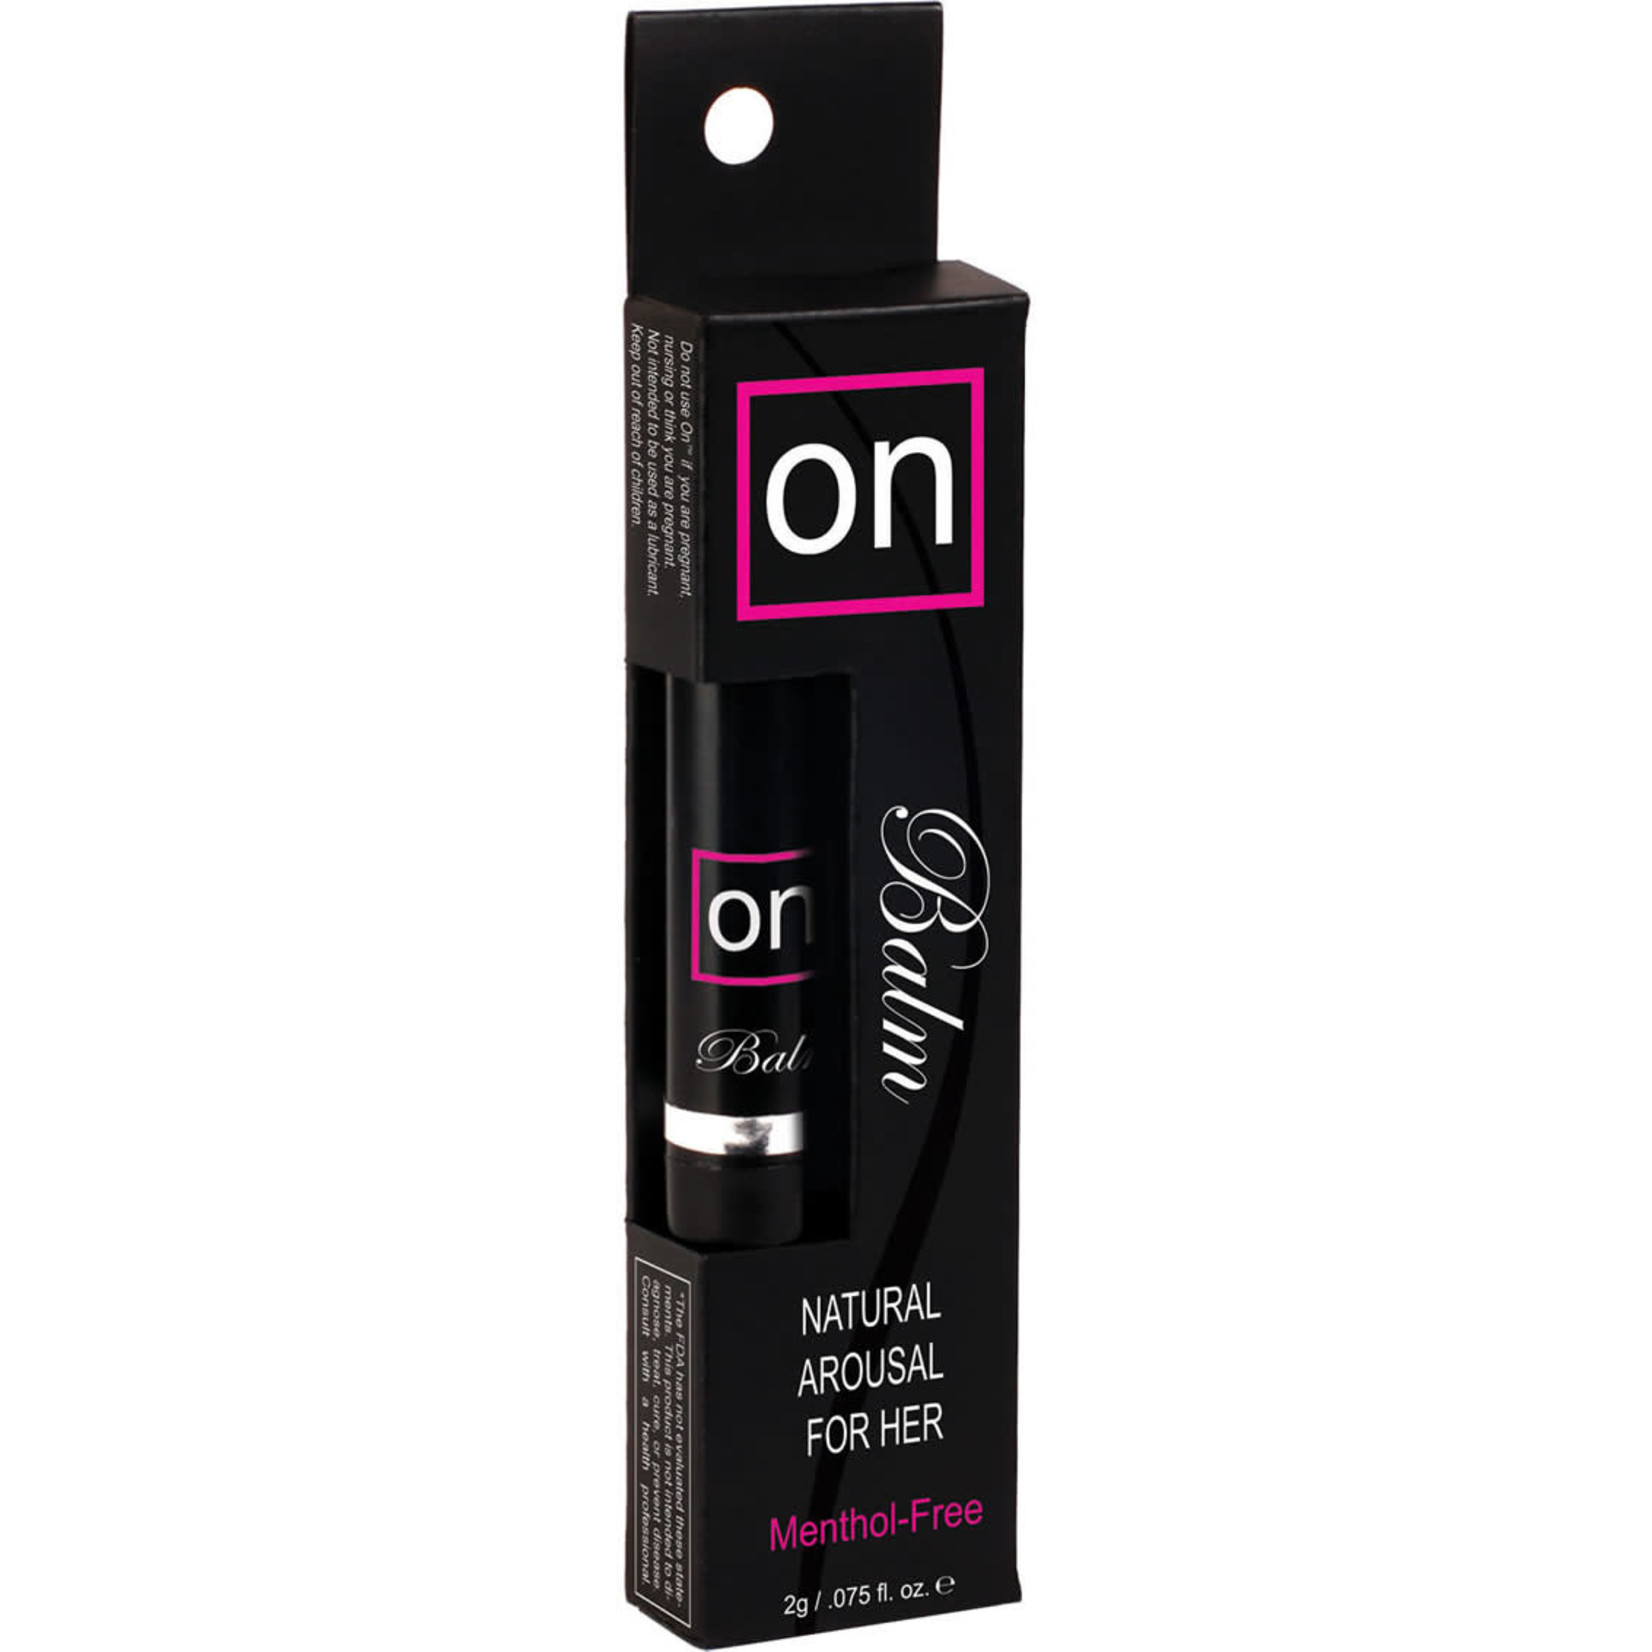 On™ Arousal Balm for Her Single Piece Box